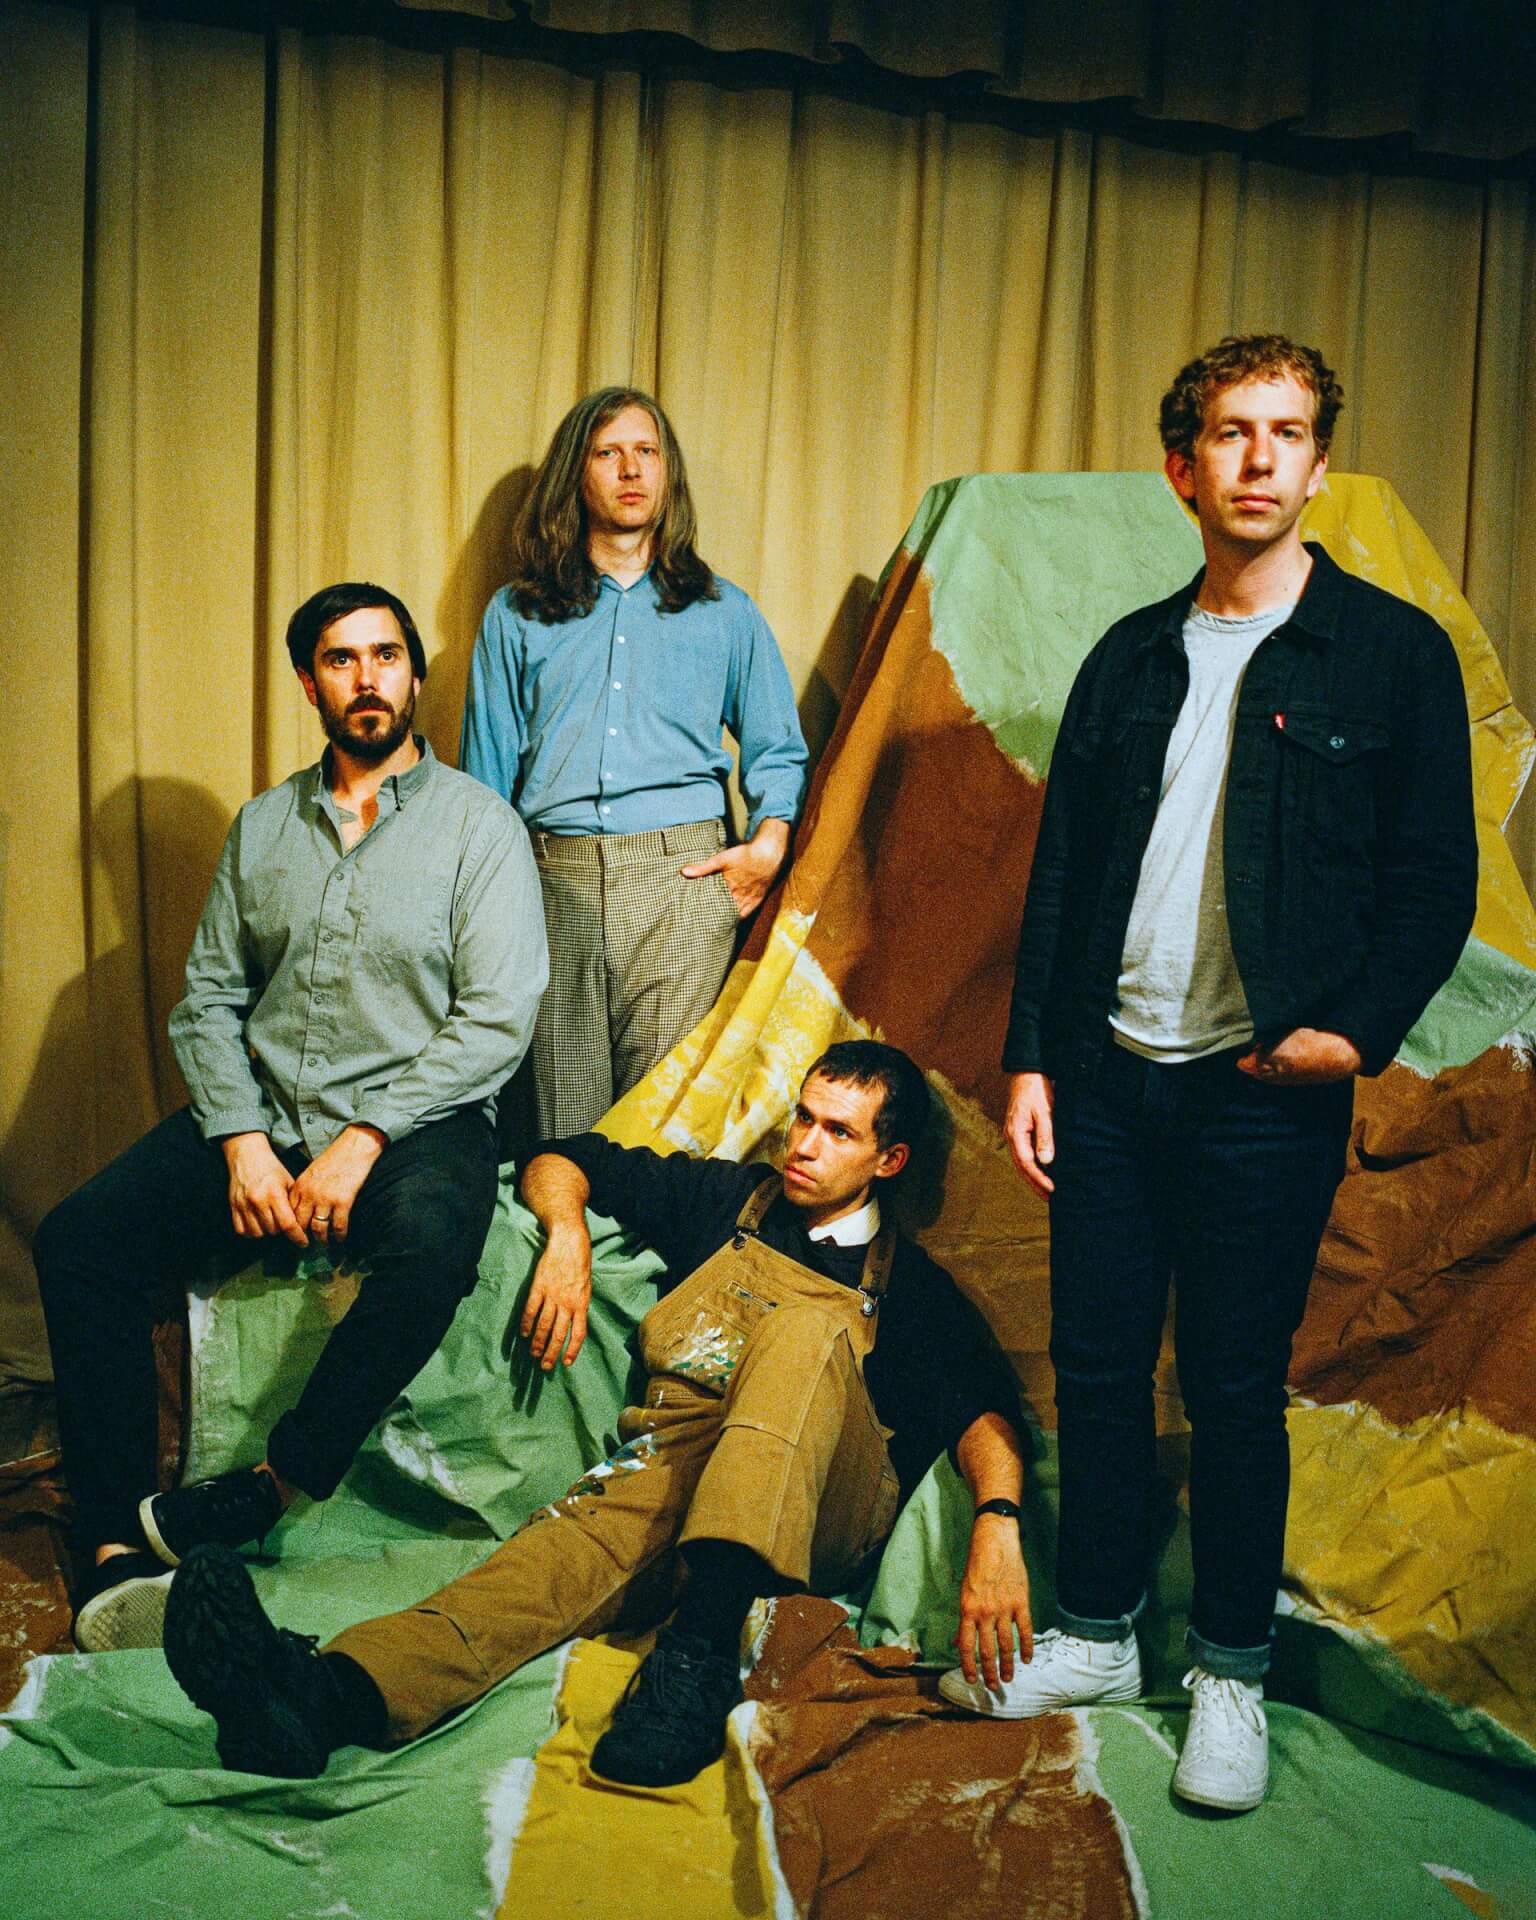 Parquet Courtsがアルバム『Sympathy For Life』のリリースを発表！リードシングル“Walking at a Downtown Pace”MVも解禁 music210819_parquet_courts_1